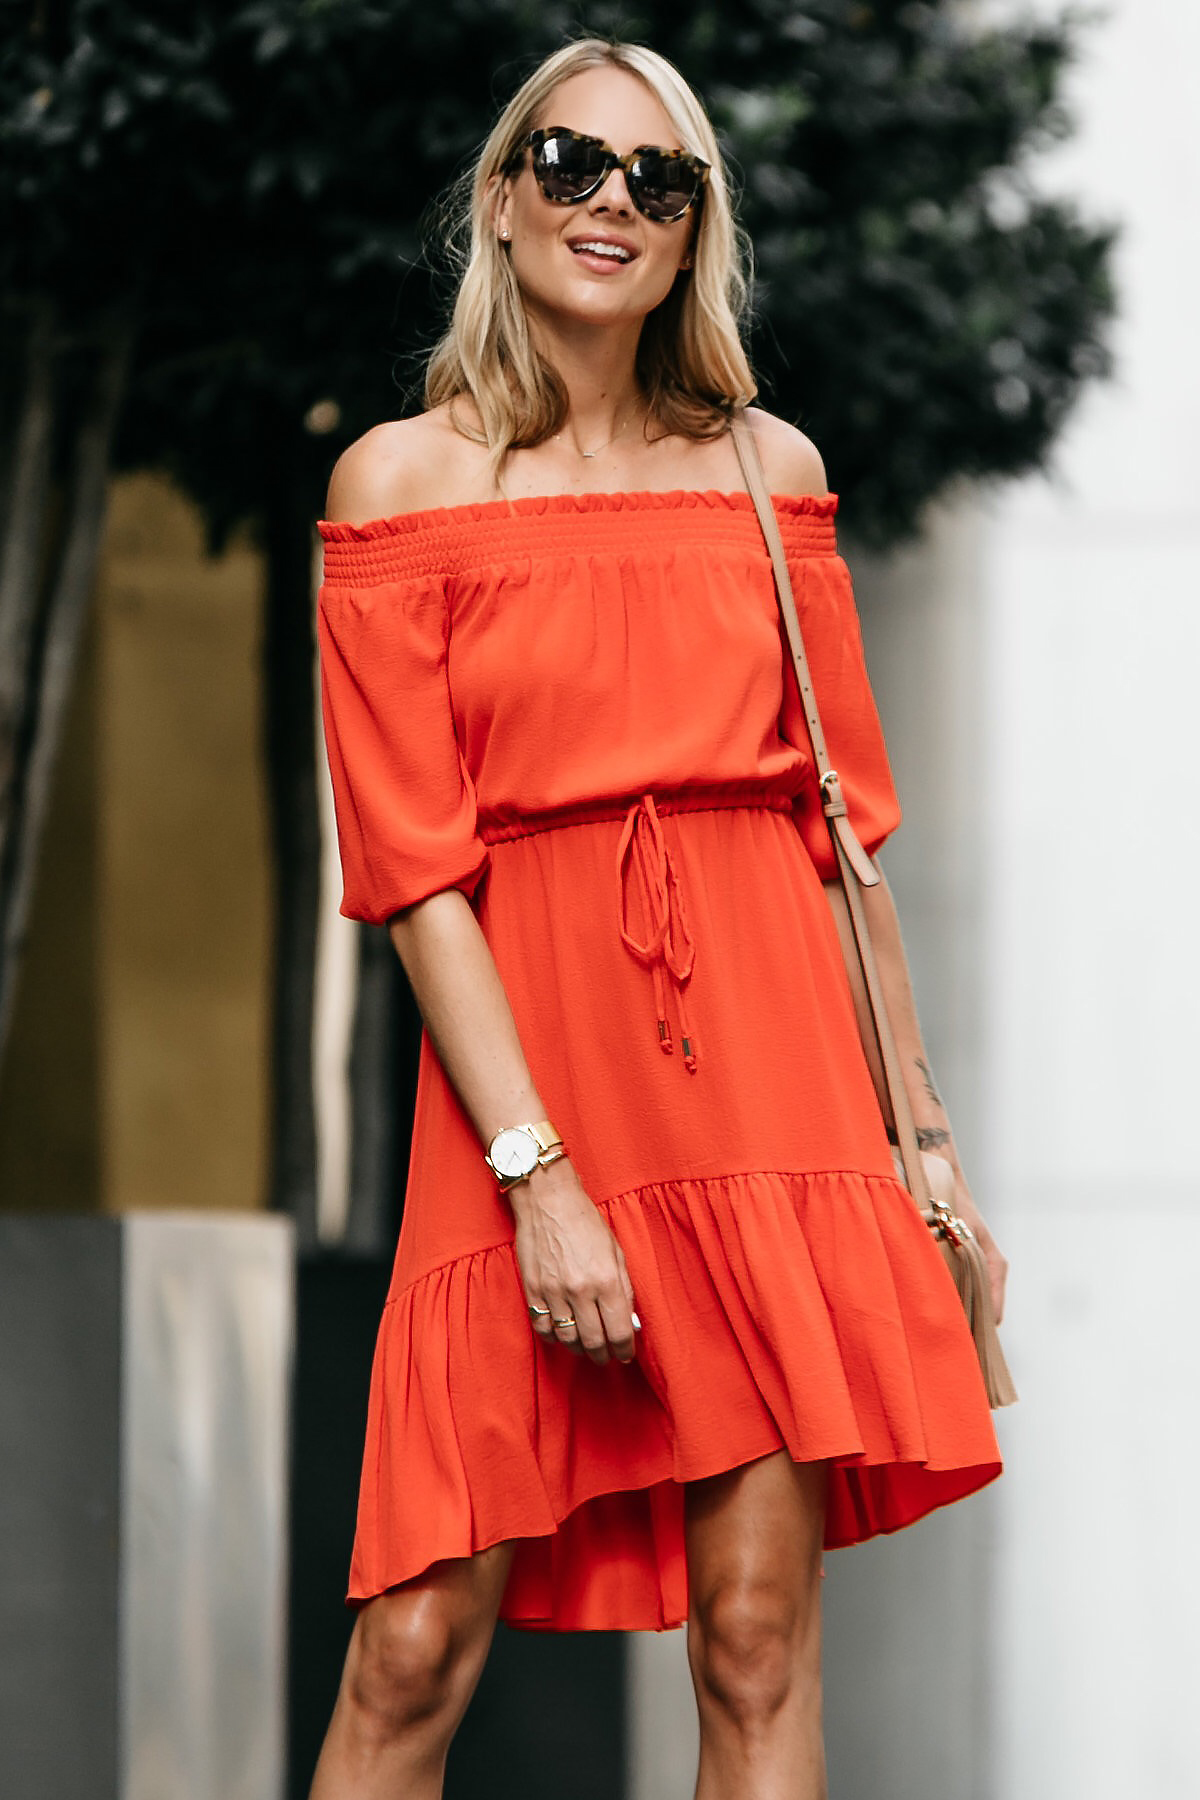 Blonde Woman Wearing Vince Camuto Red off-the-shoulder Dress